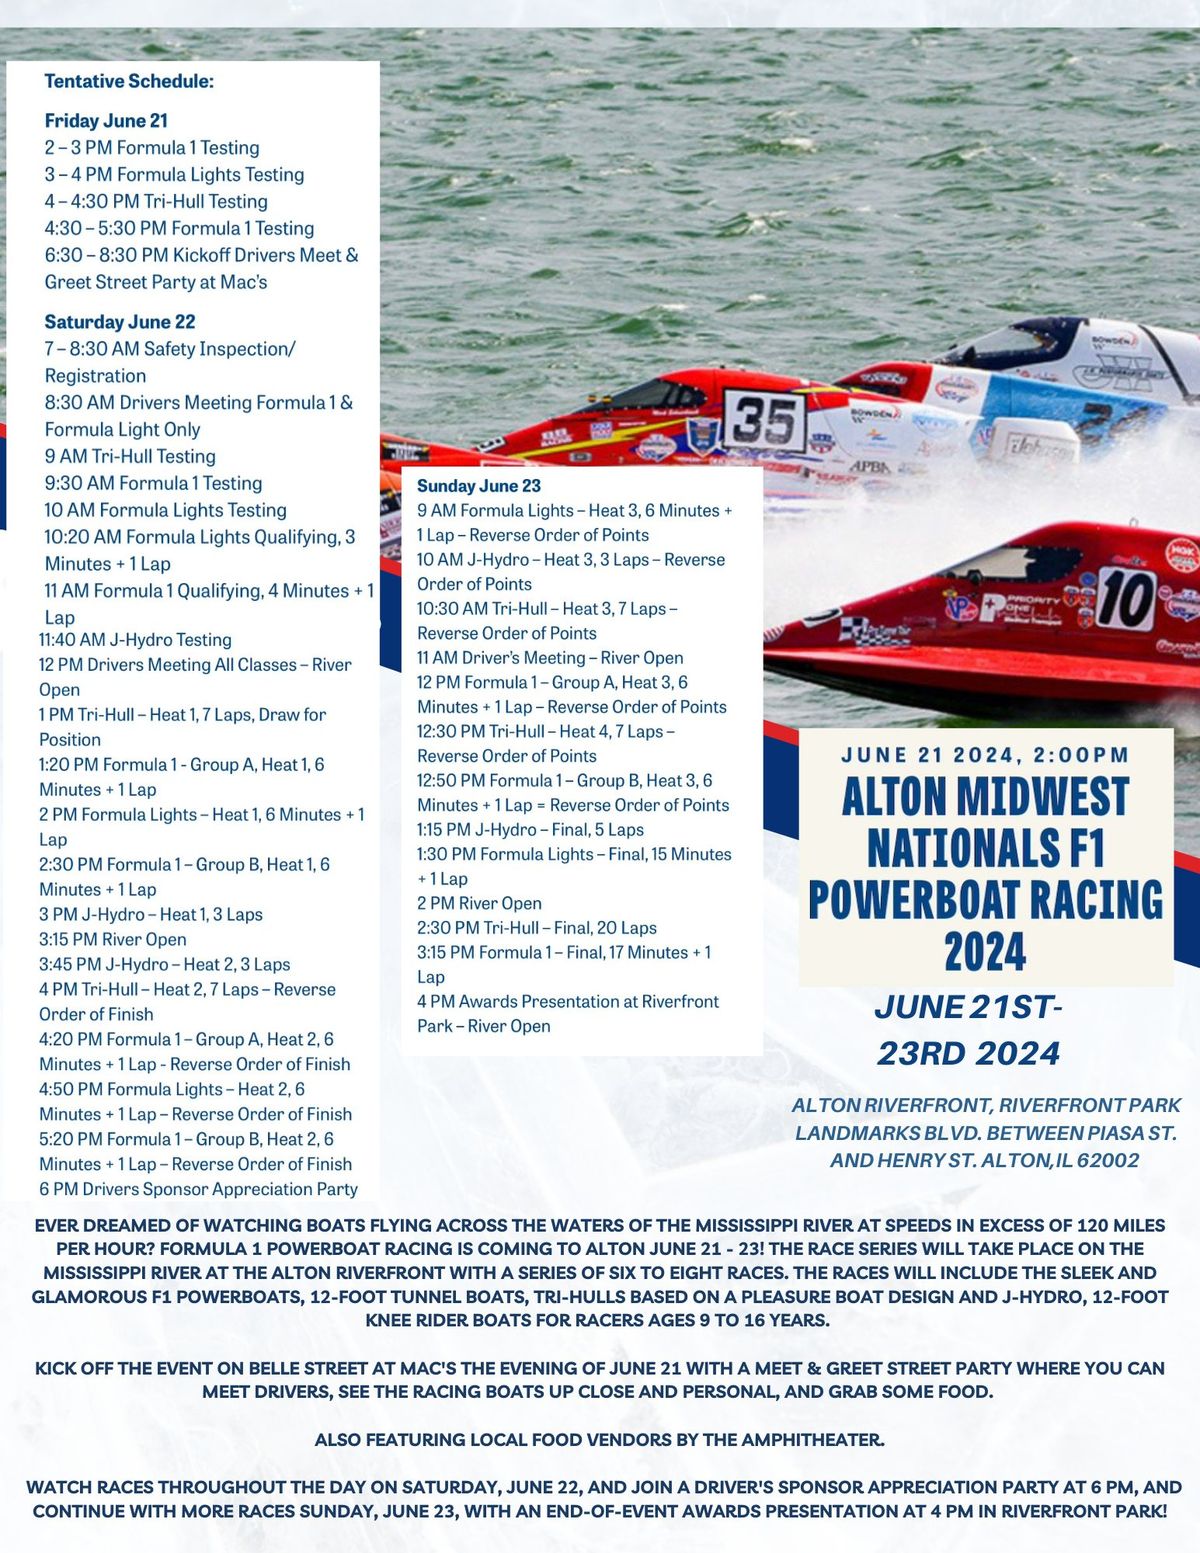 Alton Midwest Nationals F1 Powerboat racing